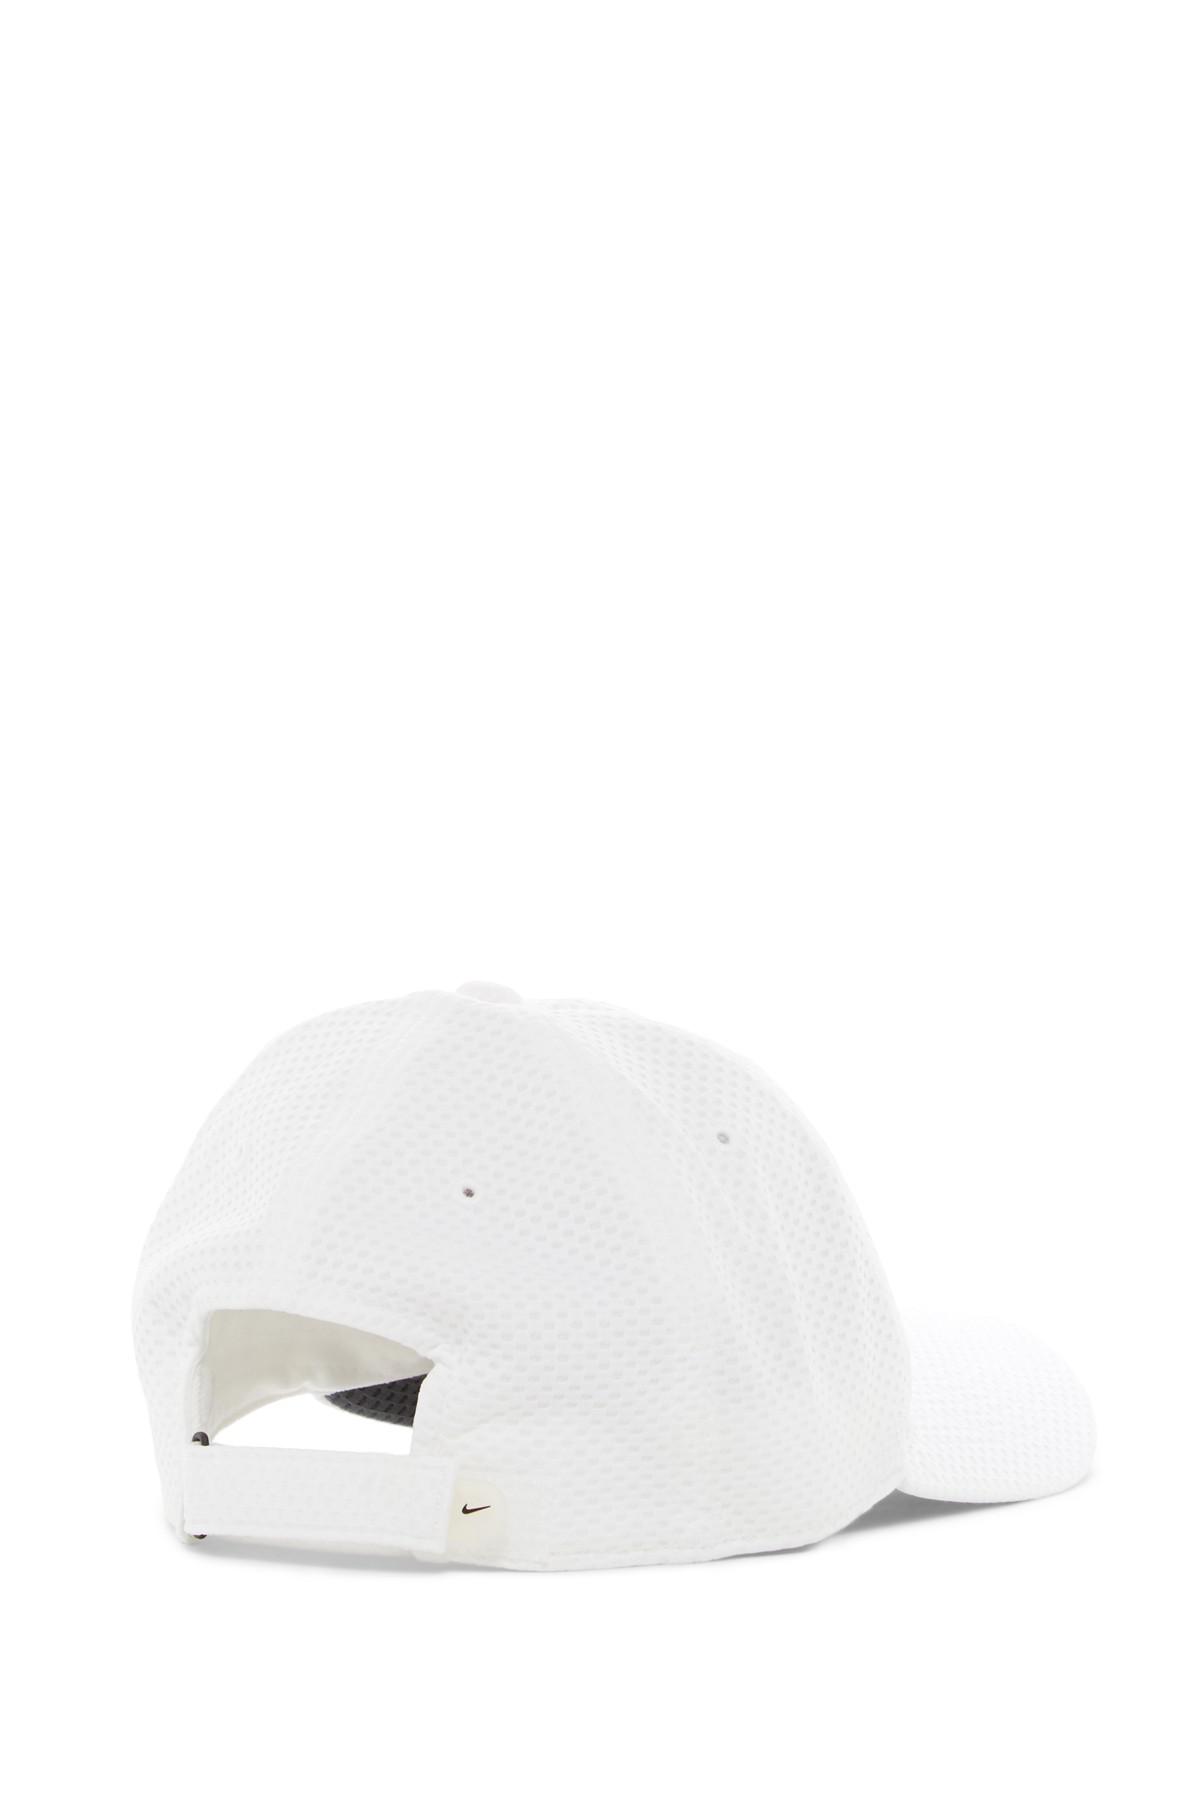 Nike Synthetic Tailwind 6 Panel Drifit Cap in White for Men - Lyst